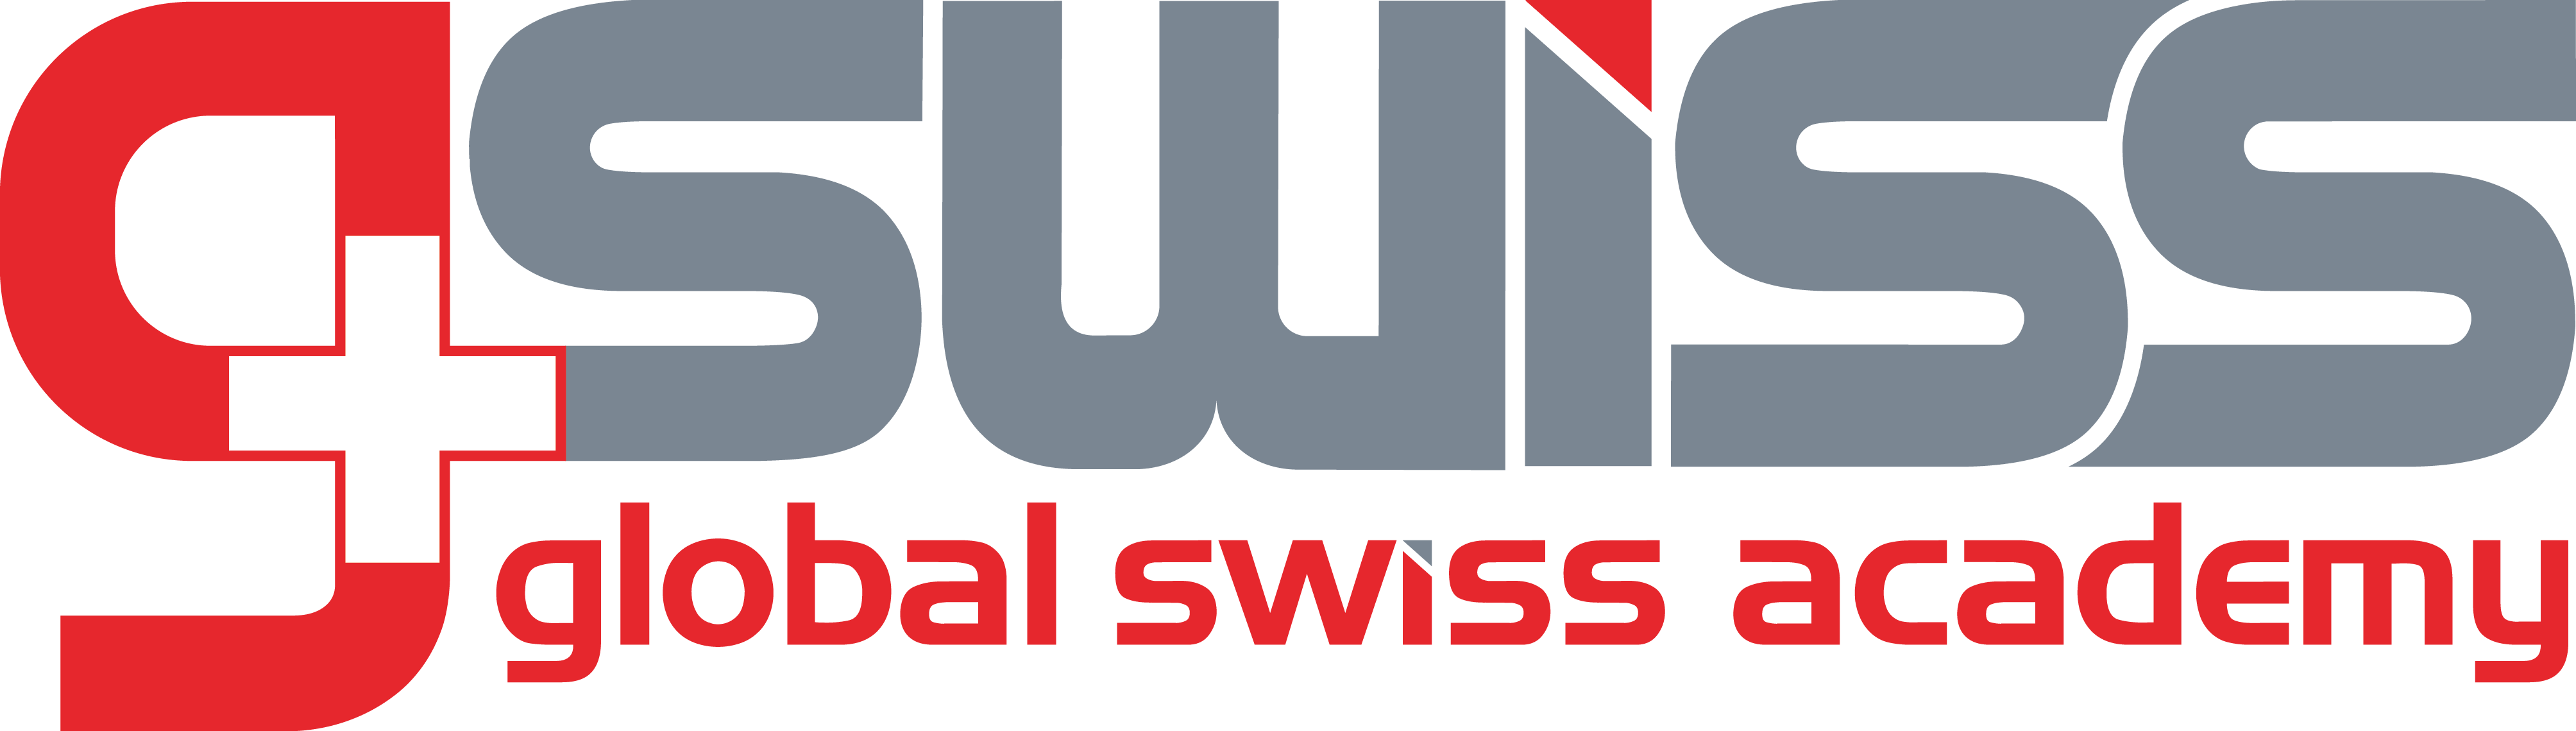 Our members - Global Swiss Academy | WYSE Travel Confederation member @2023 | USA | wysetc.org